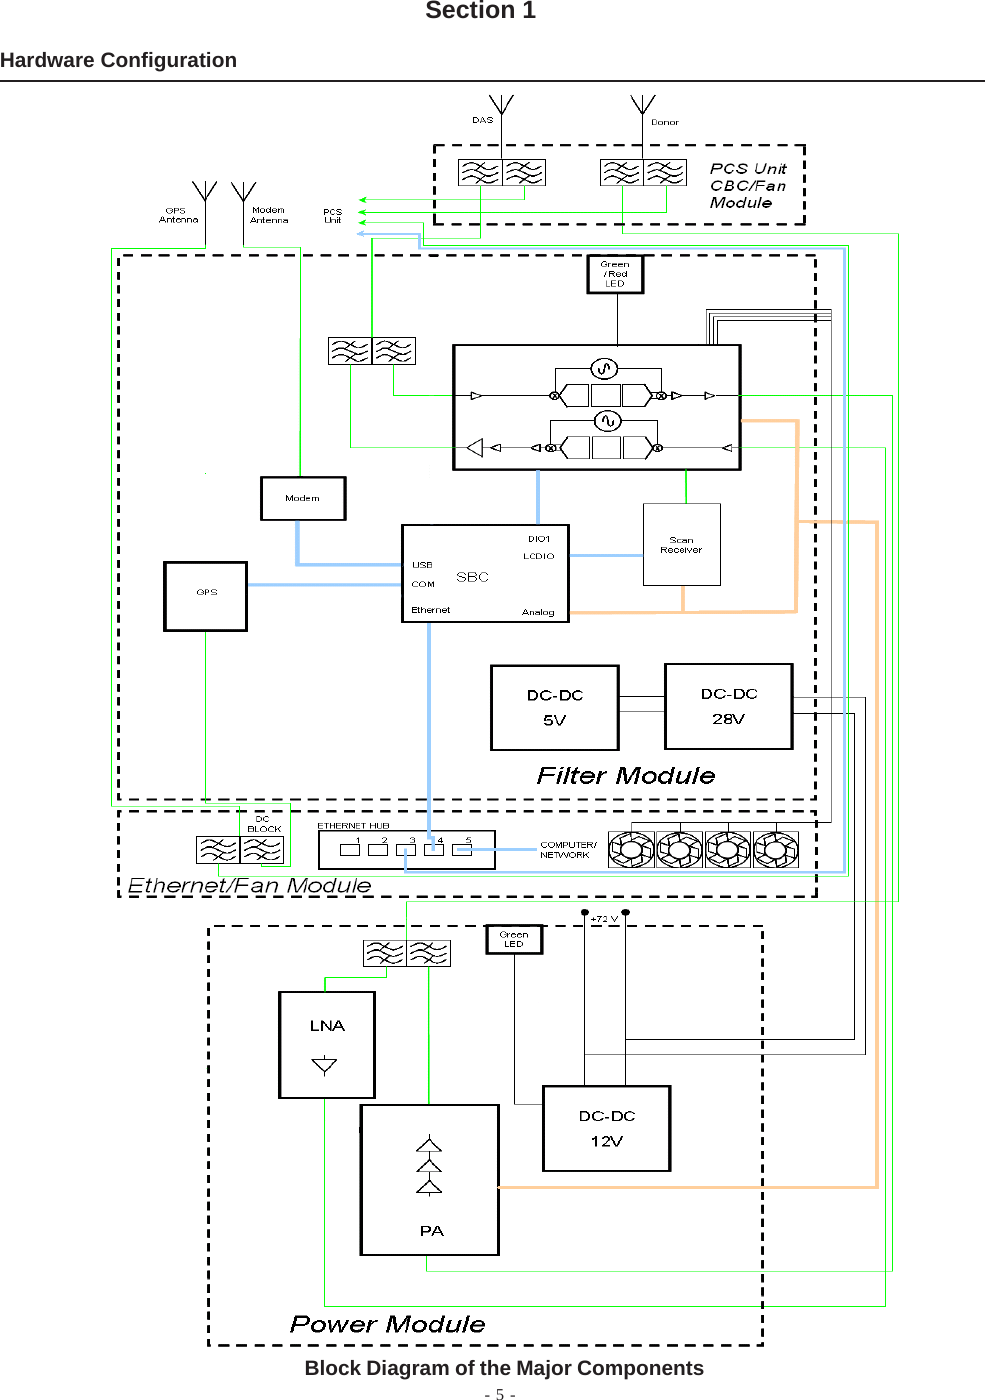 - 5 -Hardware ConfigurationBlock Diagram of the Major ComponentsSection 1